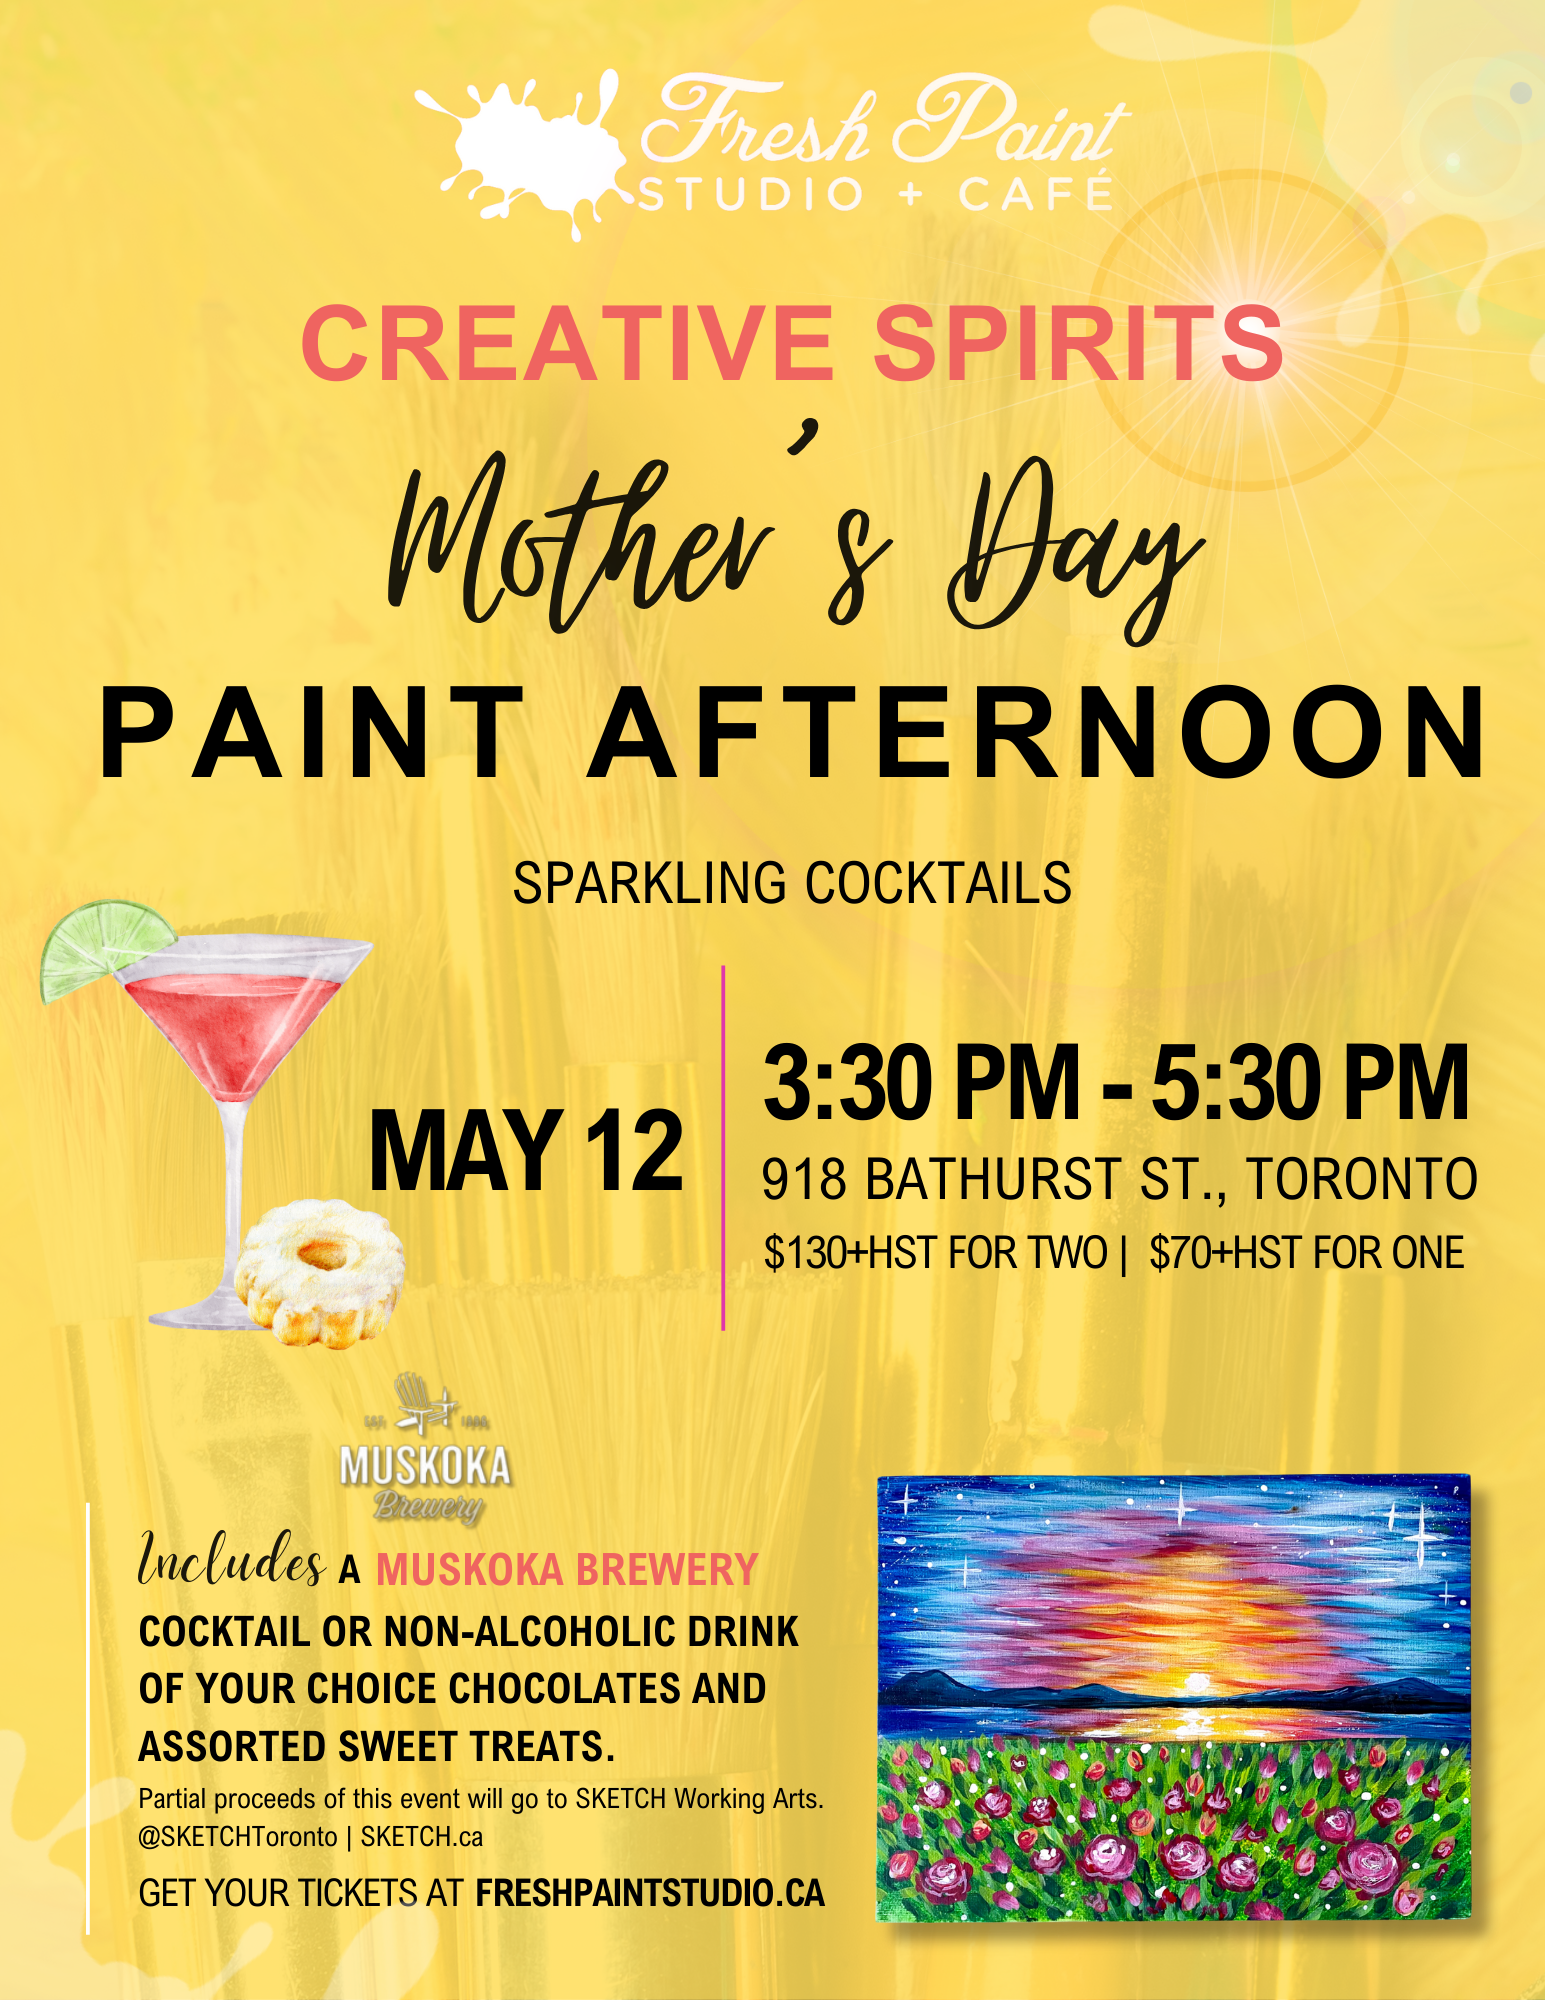 Creative Spirits - Mother's Day Paint Afternoon